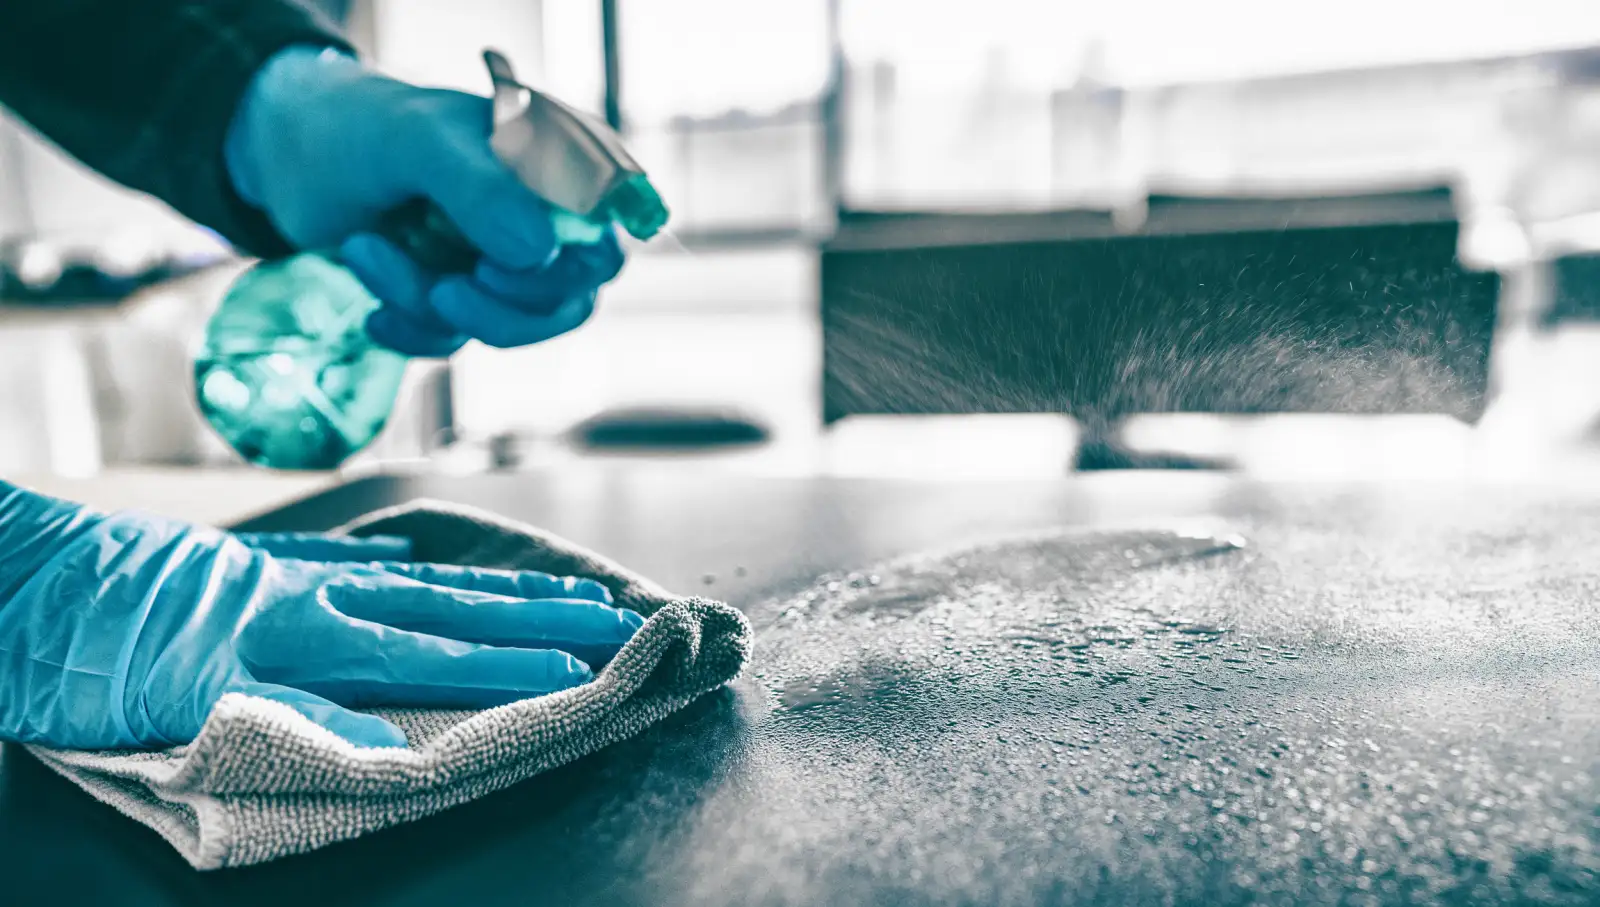 A person spraying and wiping their kitchen counter wearing blue latex gloves.